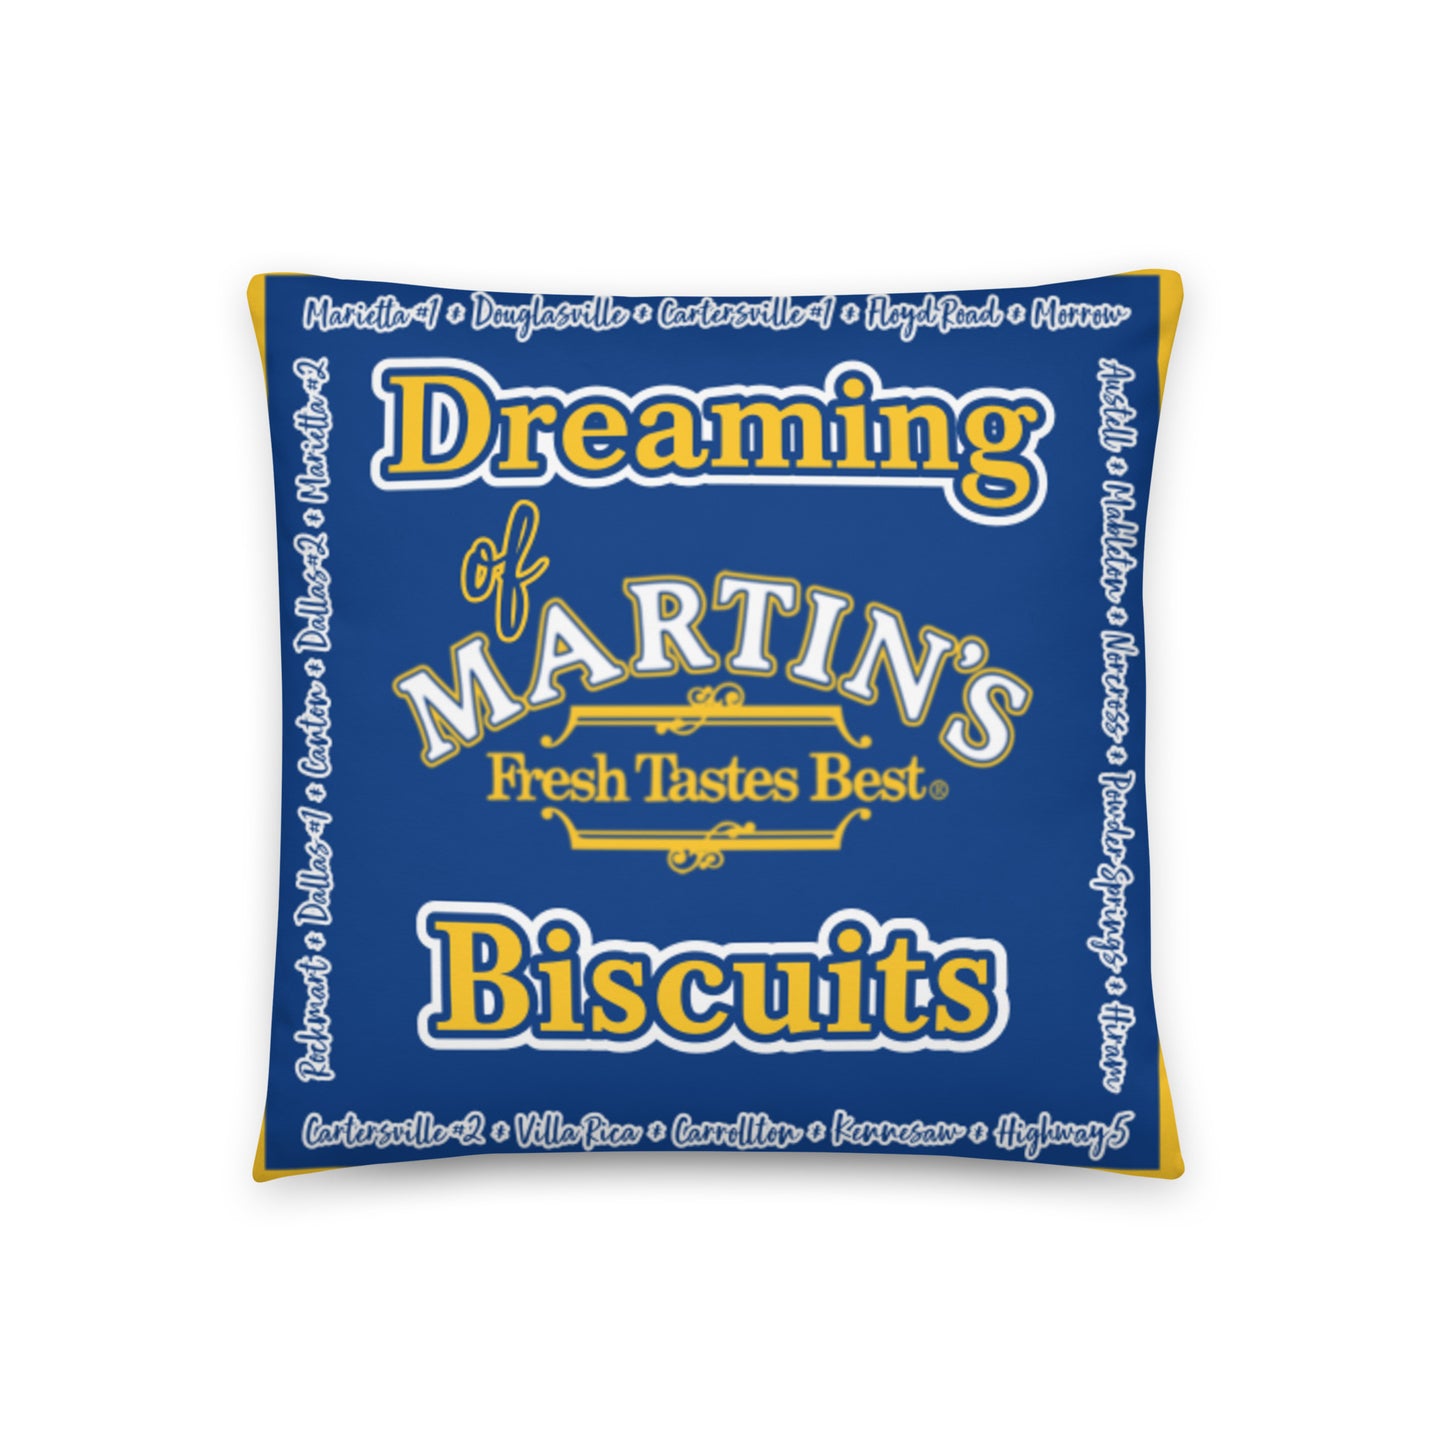 Dreaming of Martin's Biscuits Pillow - Ham, Egg & Cheese